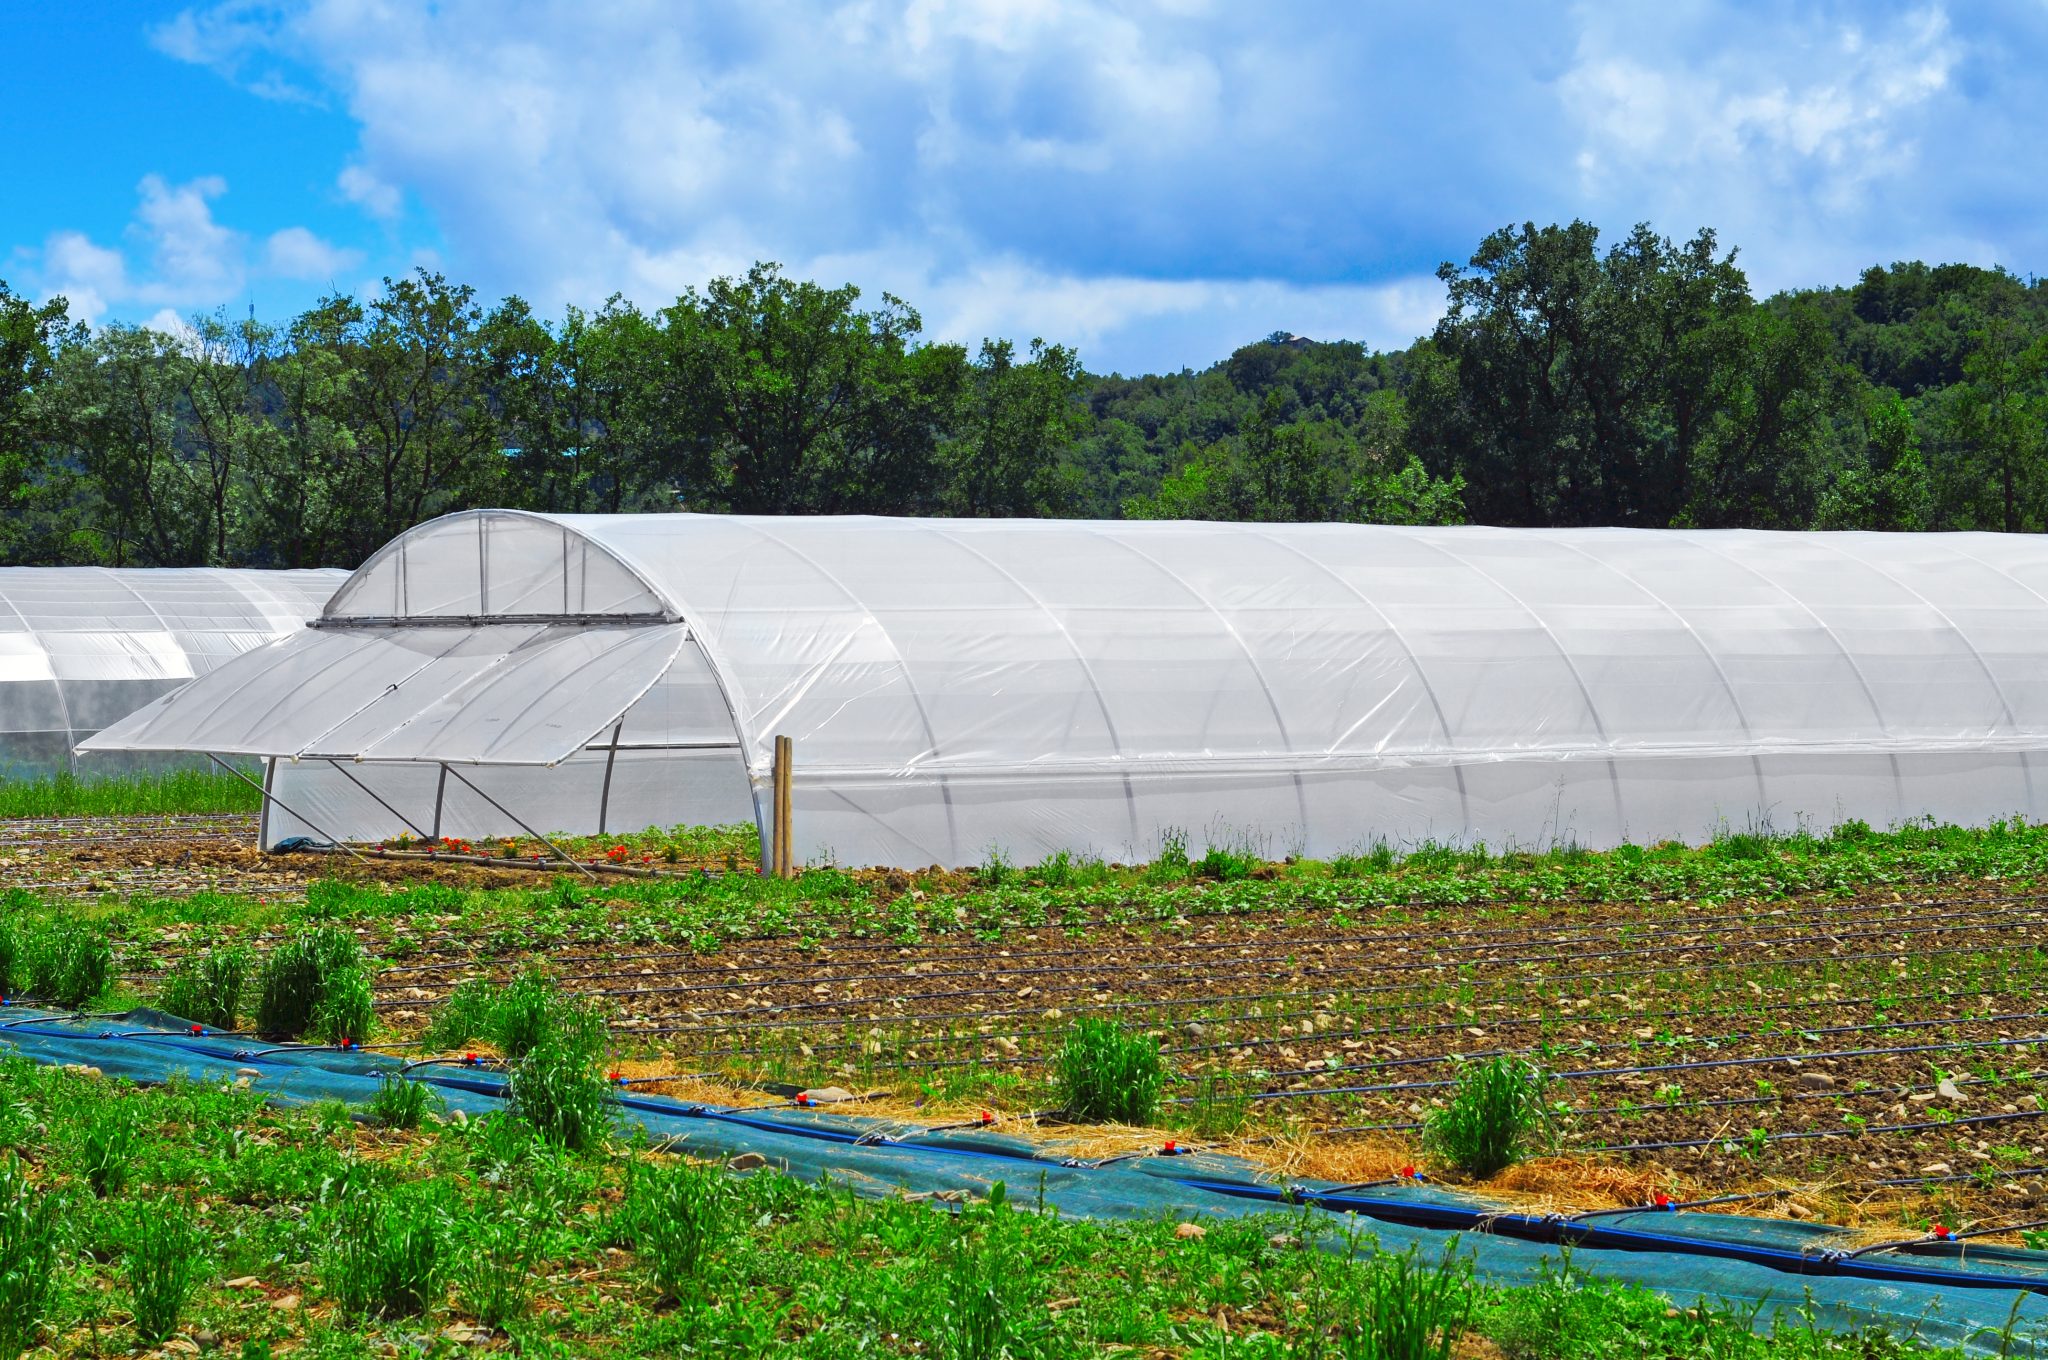 High tunnels extend the spring, fall and winter growing season in southern climates.